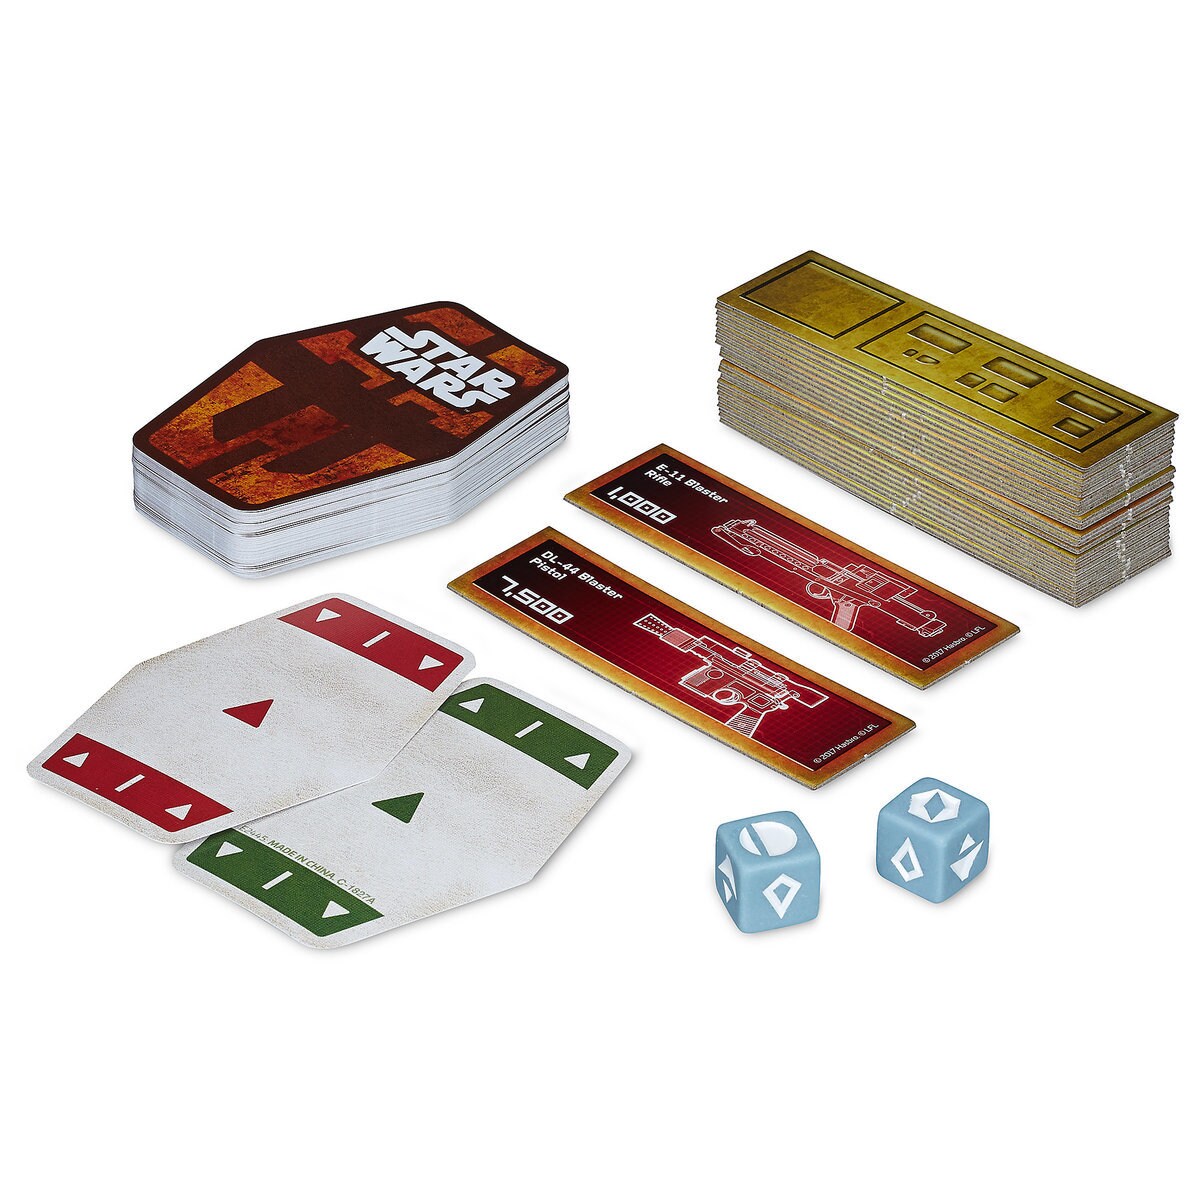 Product Image of Han Solo Card Game - Solo: A Star Wars Story # 1